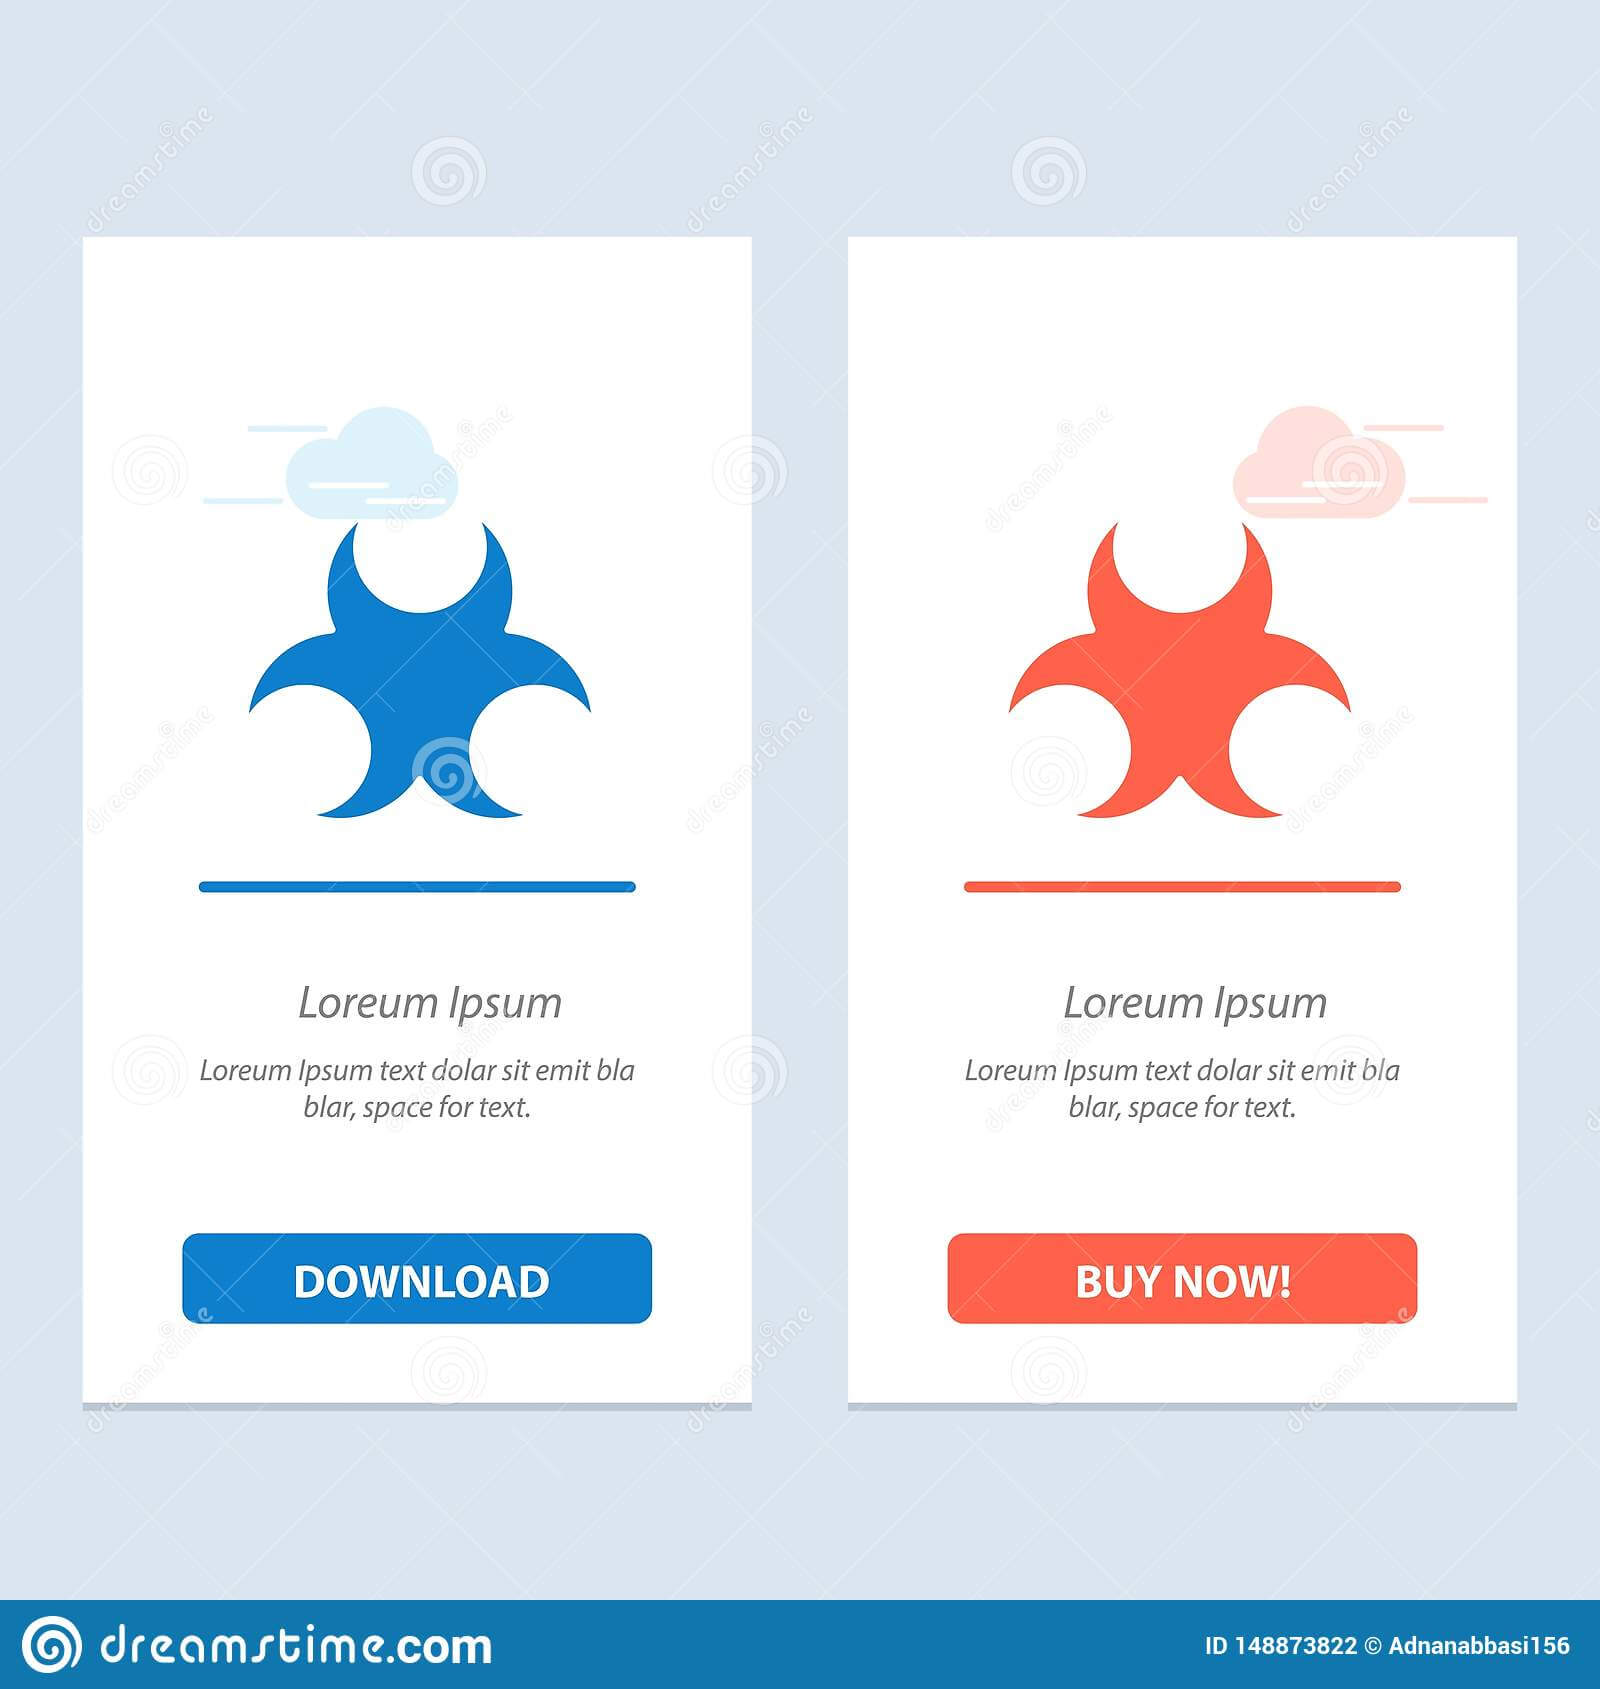 Bio, Hazard, Sign, Science Blue And Red Download And Buy Now With Bio Card Template